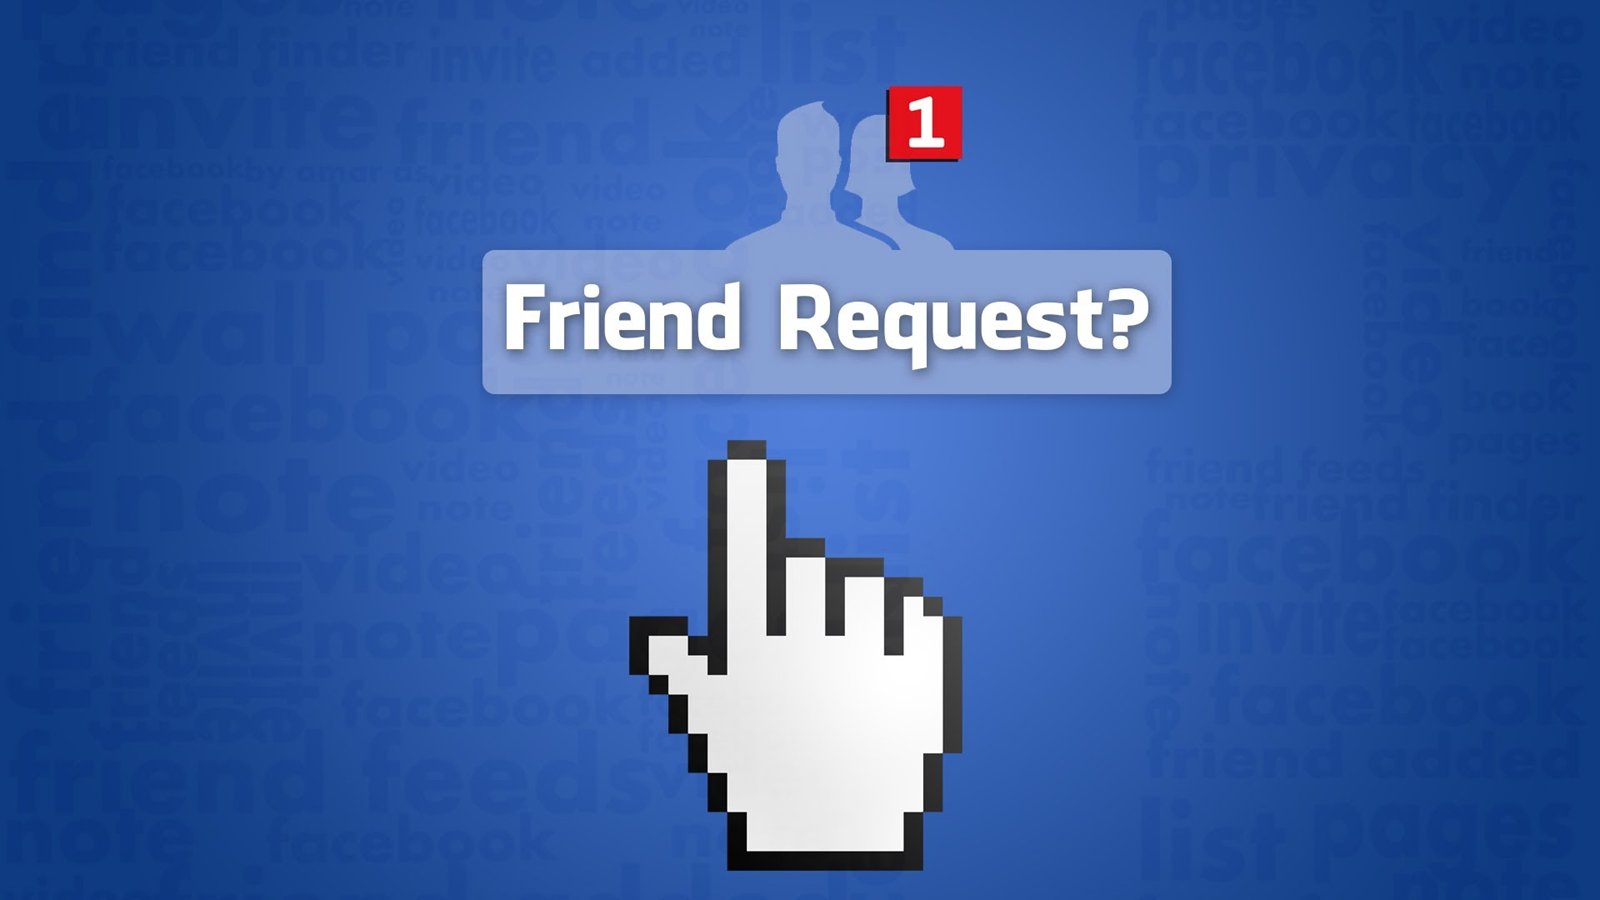 TO ‘FRIEND’ OR NOT TO ‘FRIEND’?